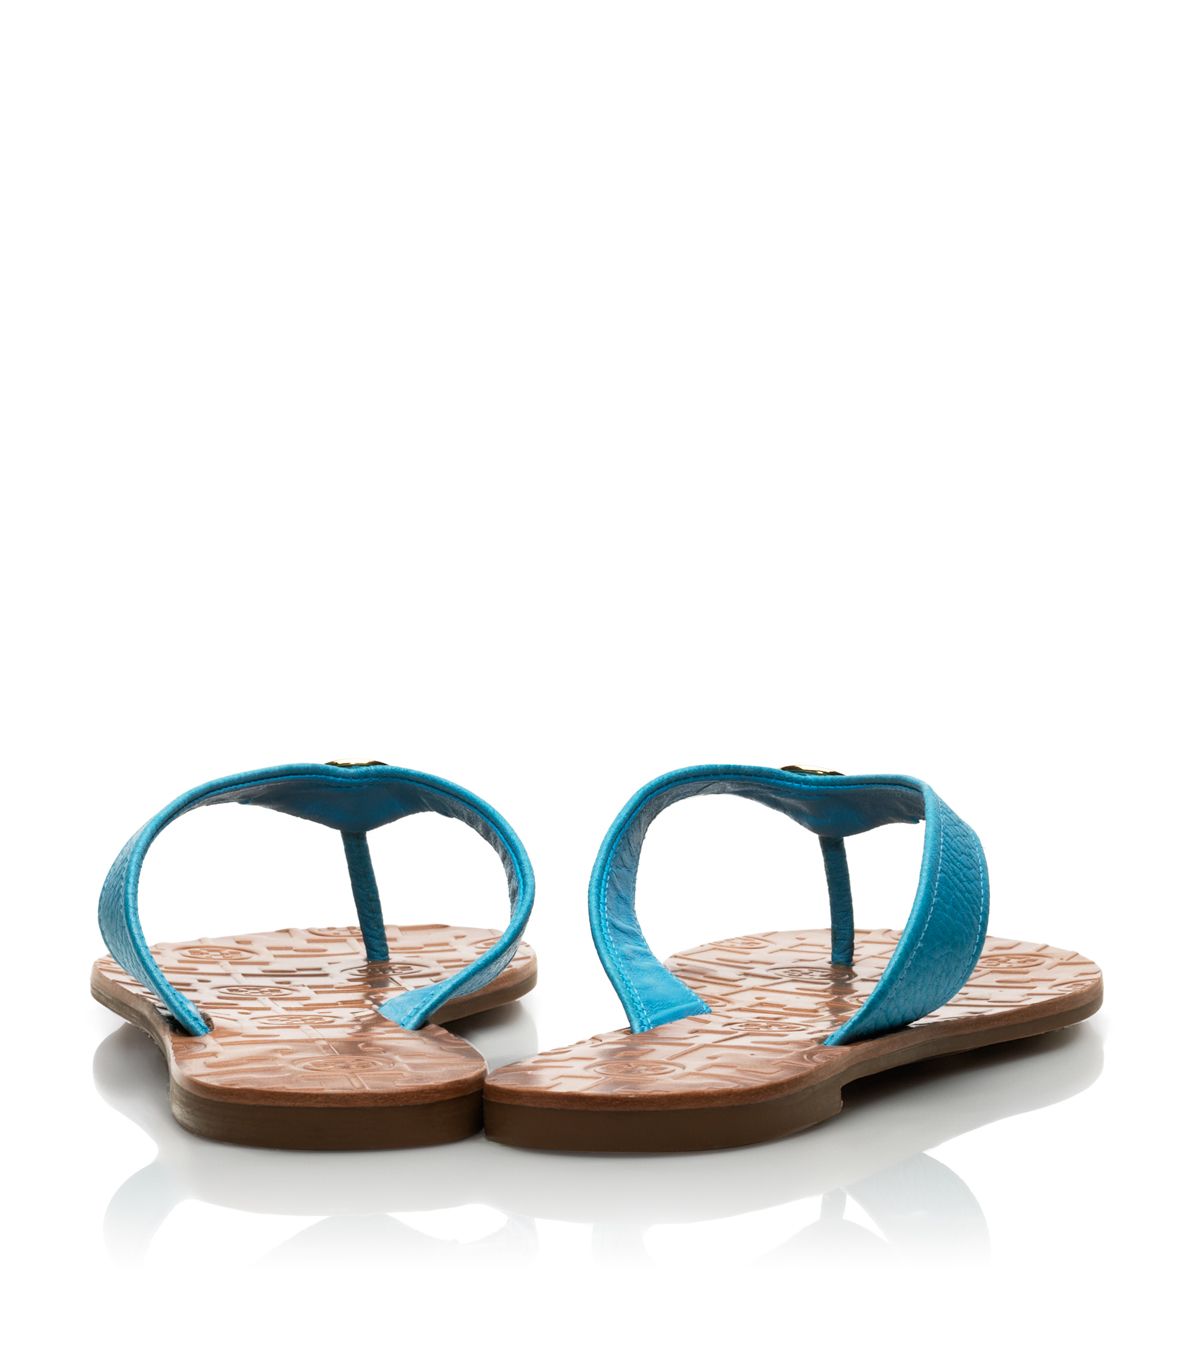 Tory Burch Tumbled Leather Thora 2 Sandal in Blue - Lyst